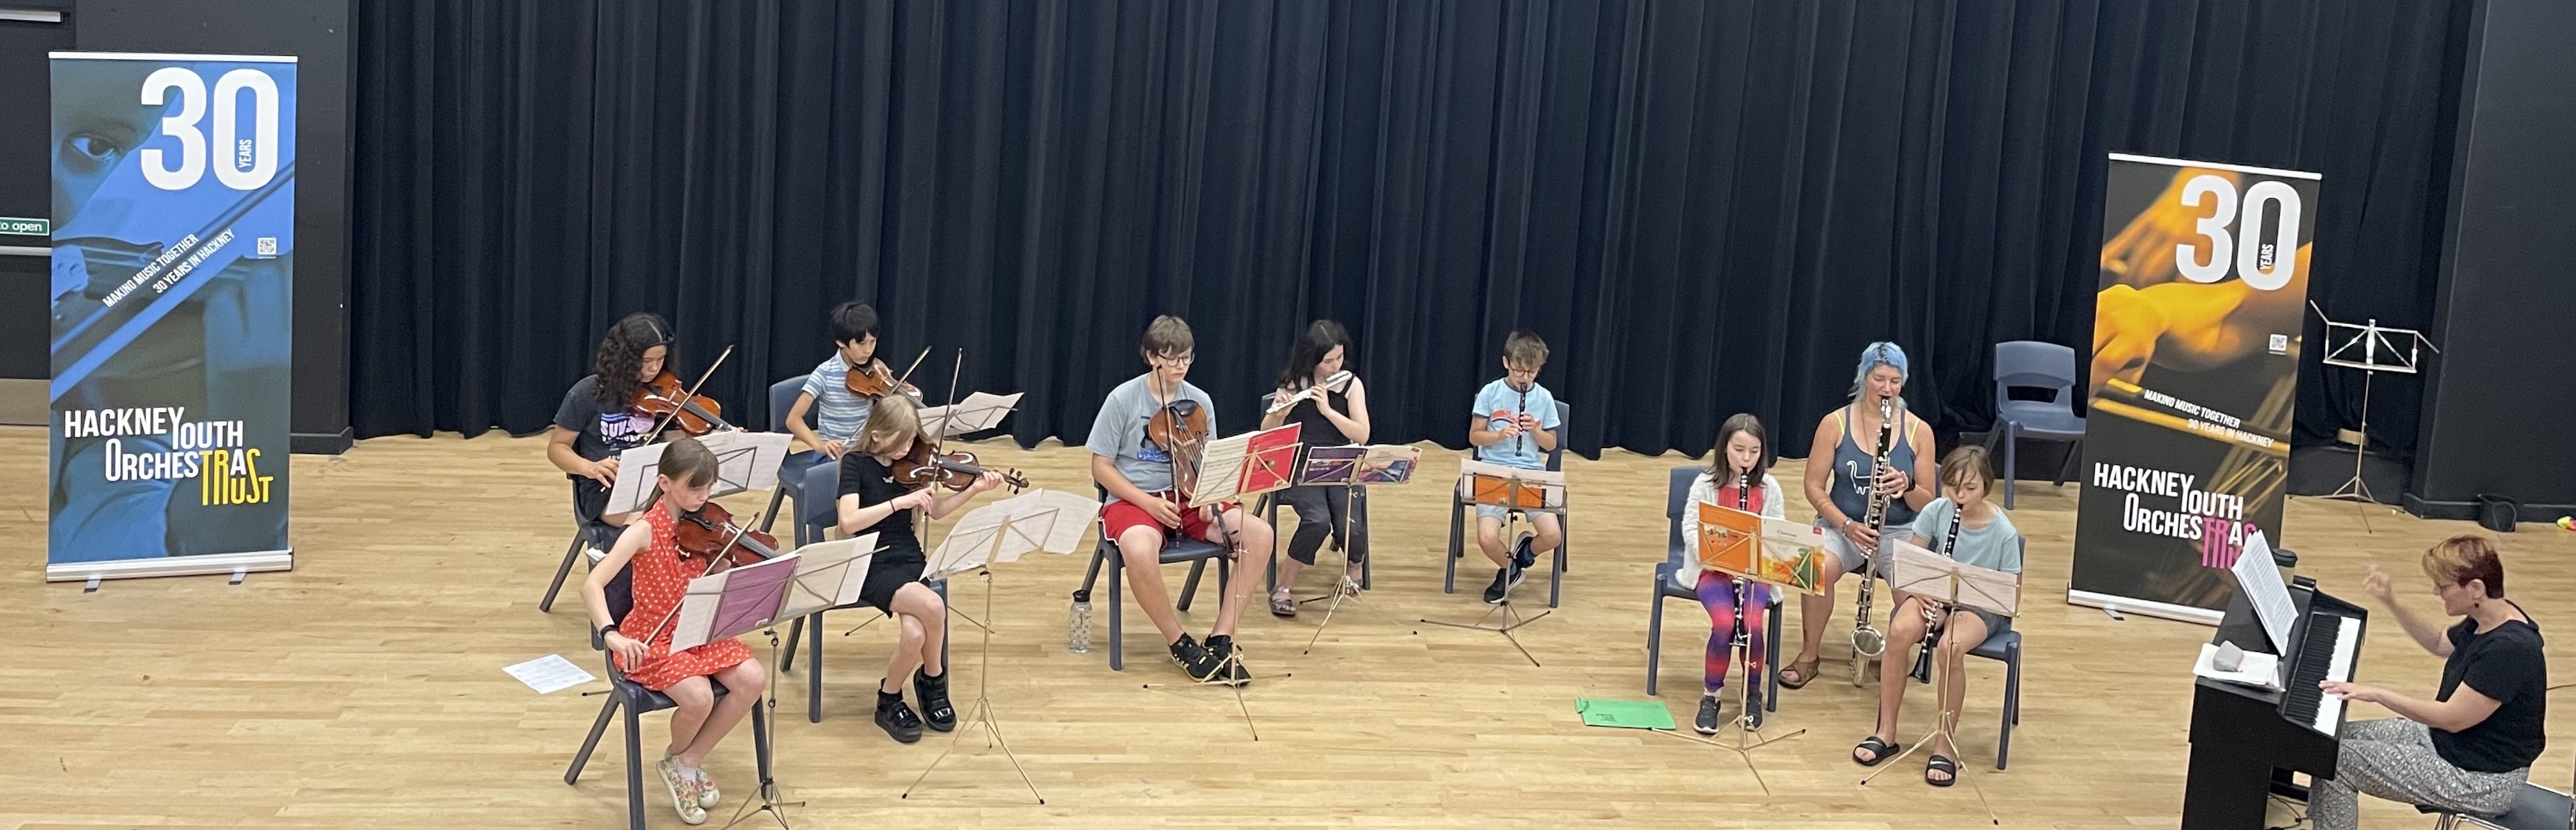 HYOT's Junior Orchestra performing on stage at Stoke Newington School's Theatre. On either side of them there are banners celebrating HYOT's 30th anniversary.